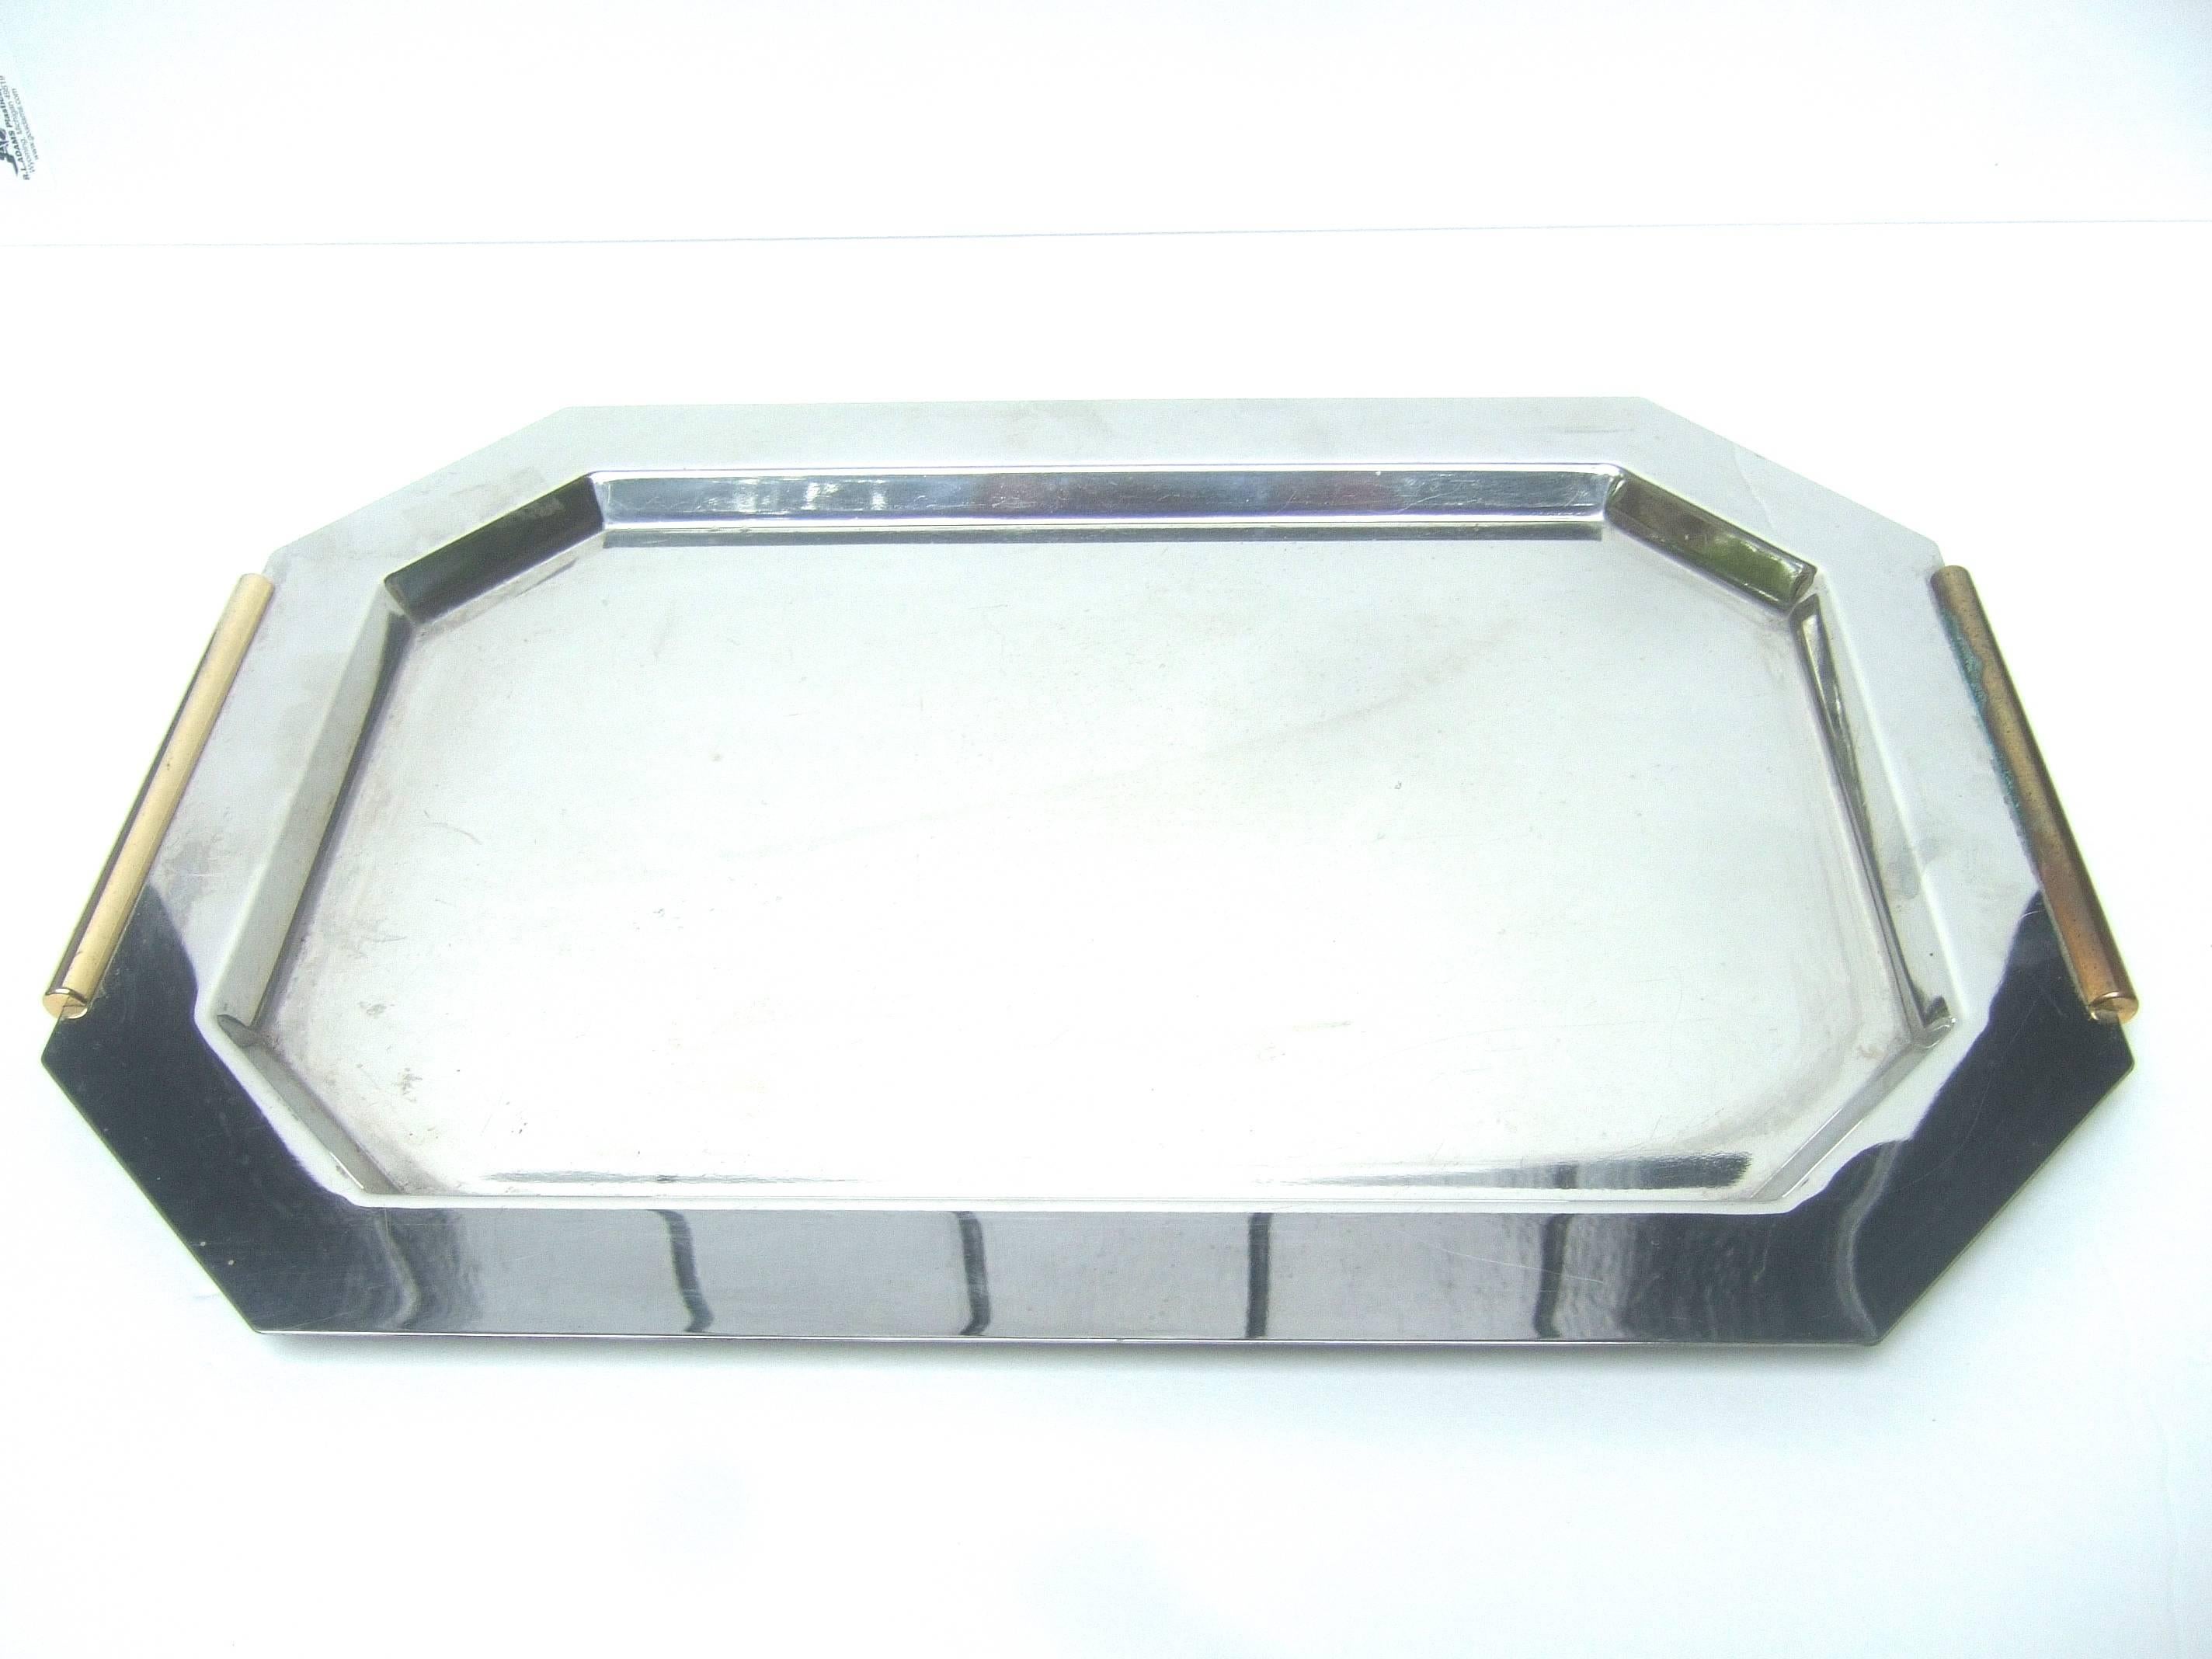 ****RESERVED SALE PENDING FOR JOHN***

Van Cleef & Arpels Paris sleek chrome vanity tray c 1990
The art deco inspired rectangular tray is accented
with gilt metal trim on the sides that serve as low
profile handles 

Makes an elegant